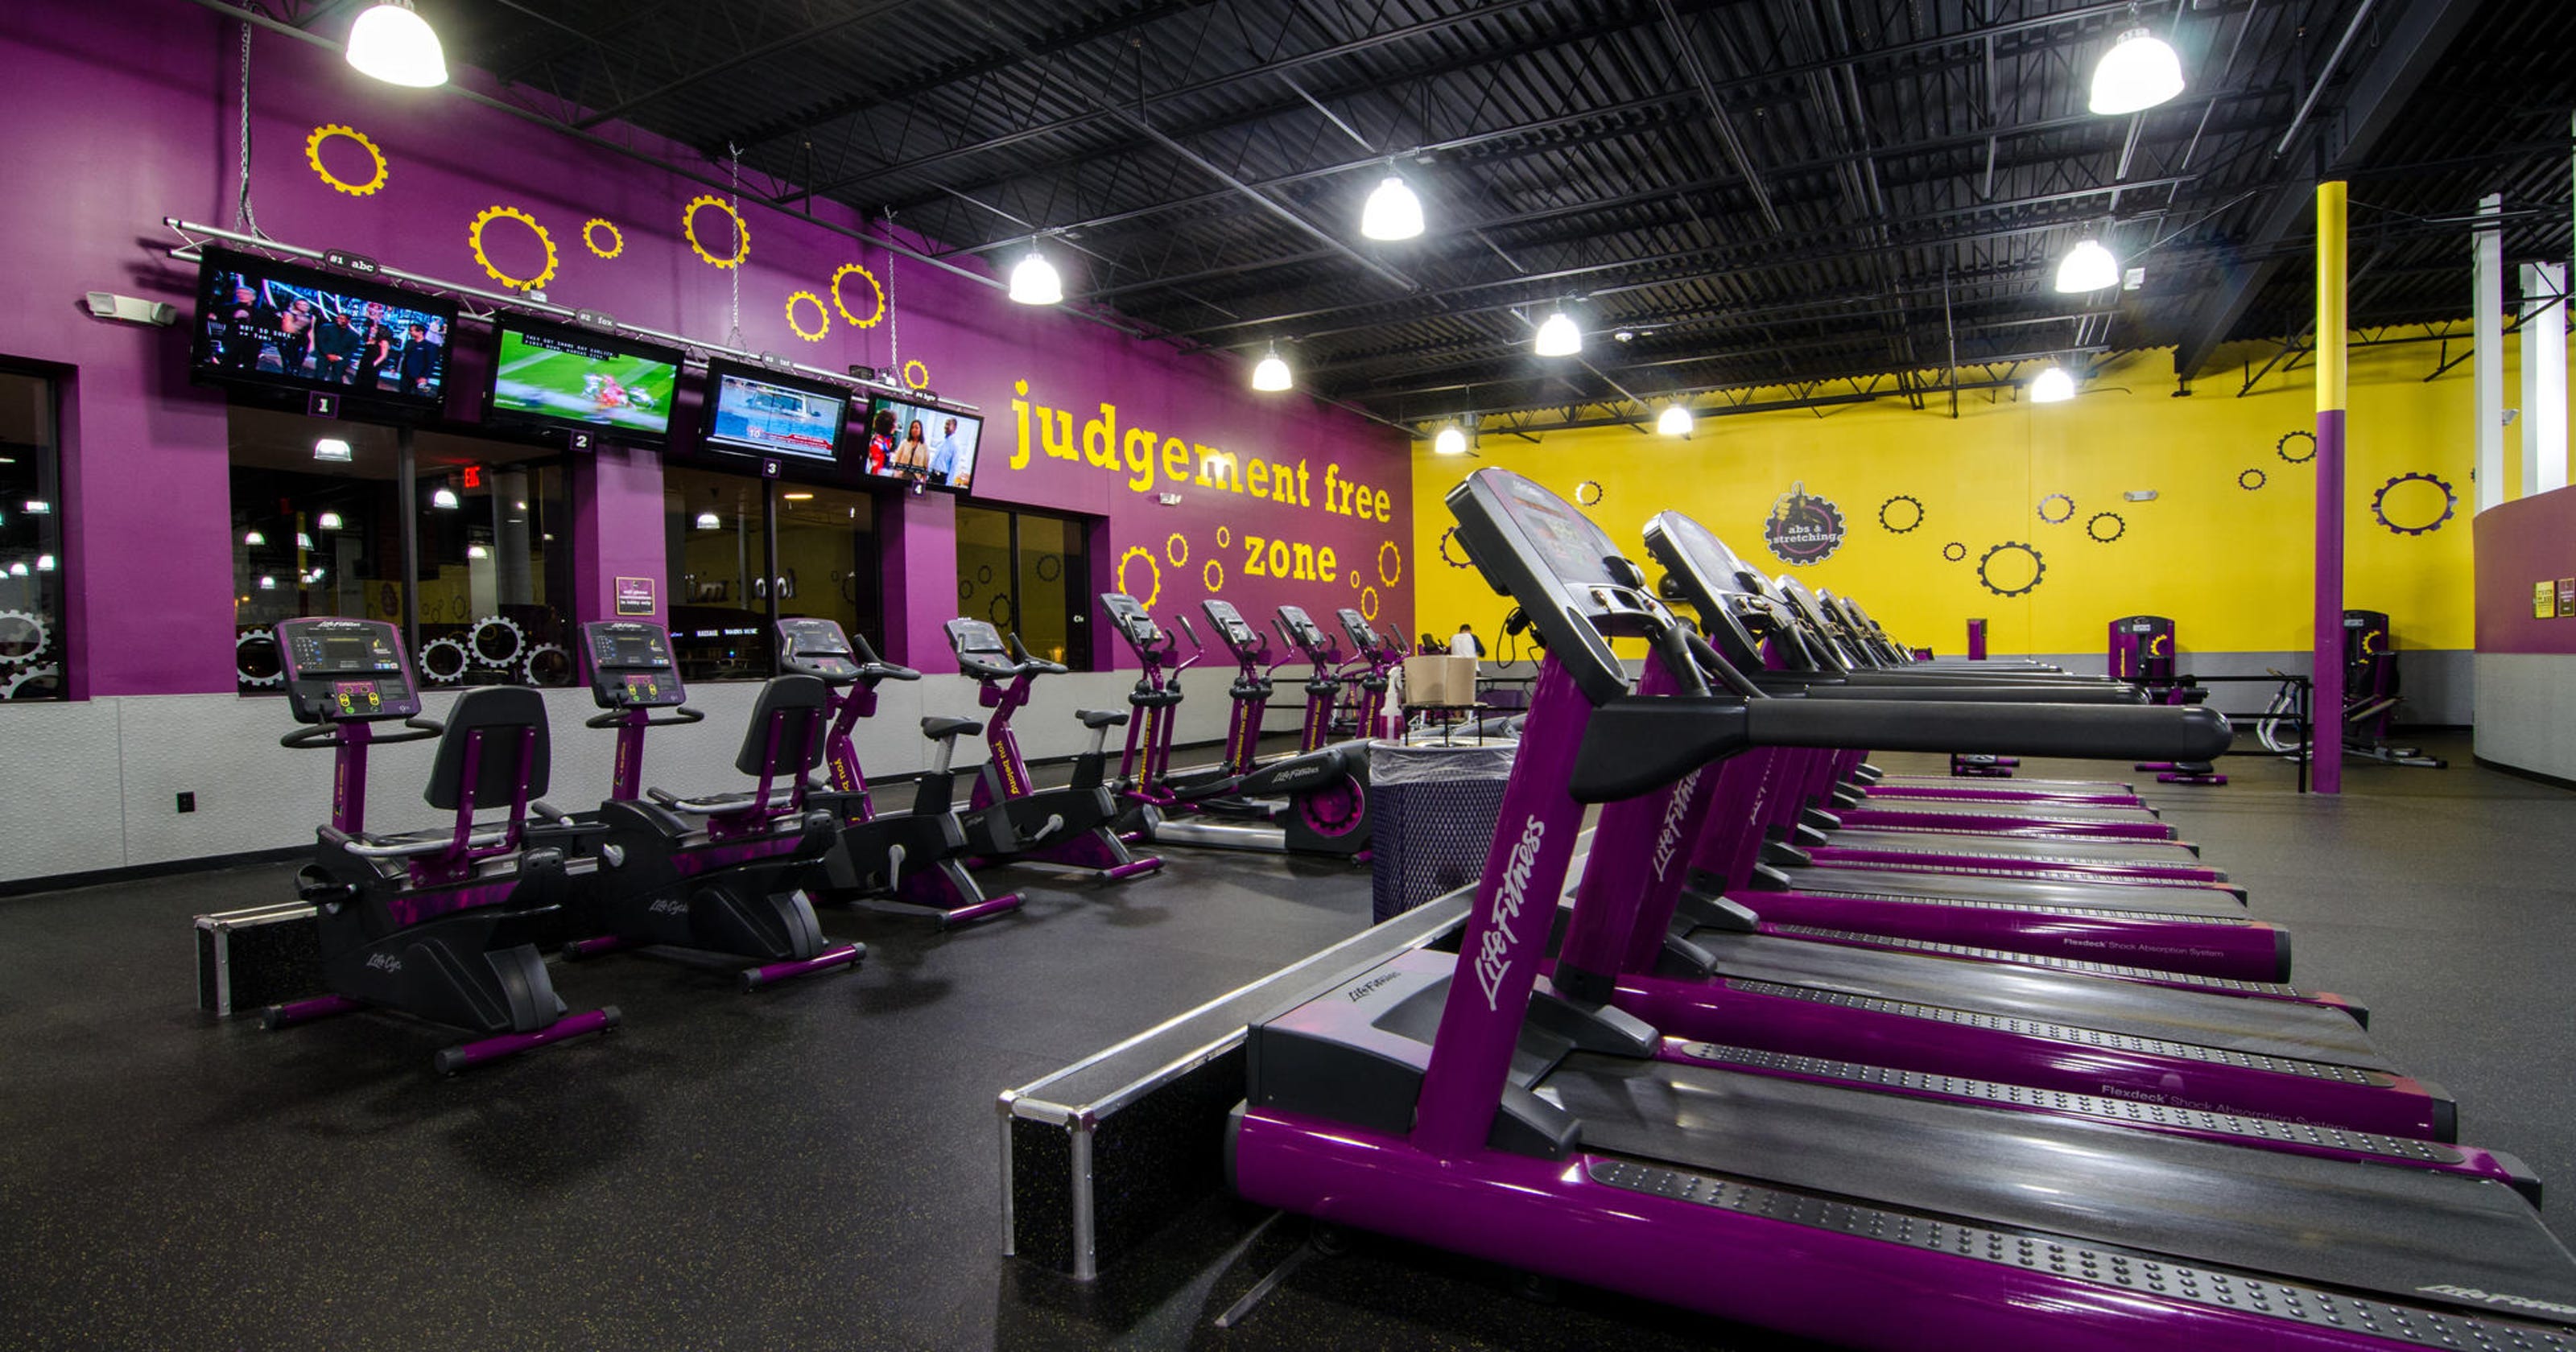 5 Day How To Freeze Account At Planet Fitness for Women